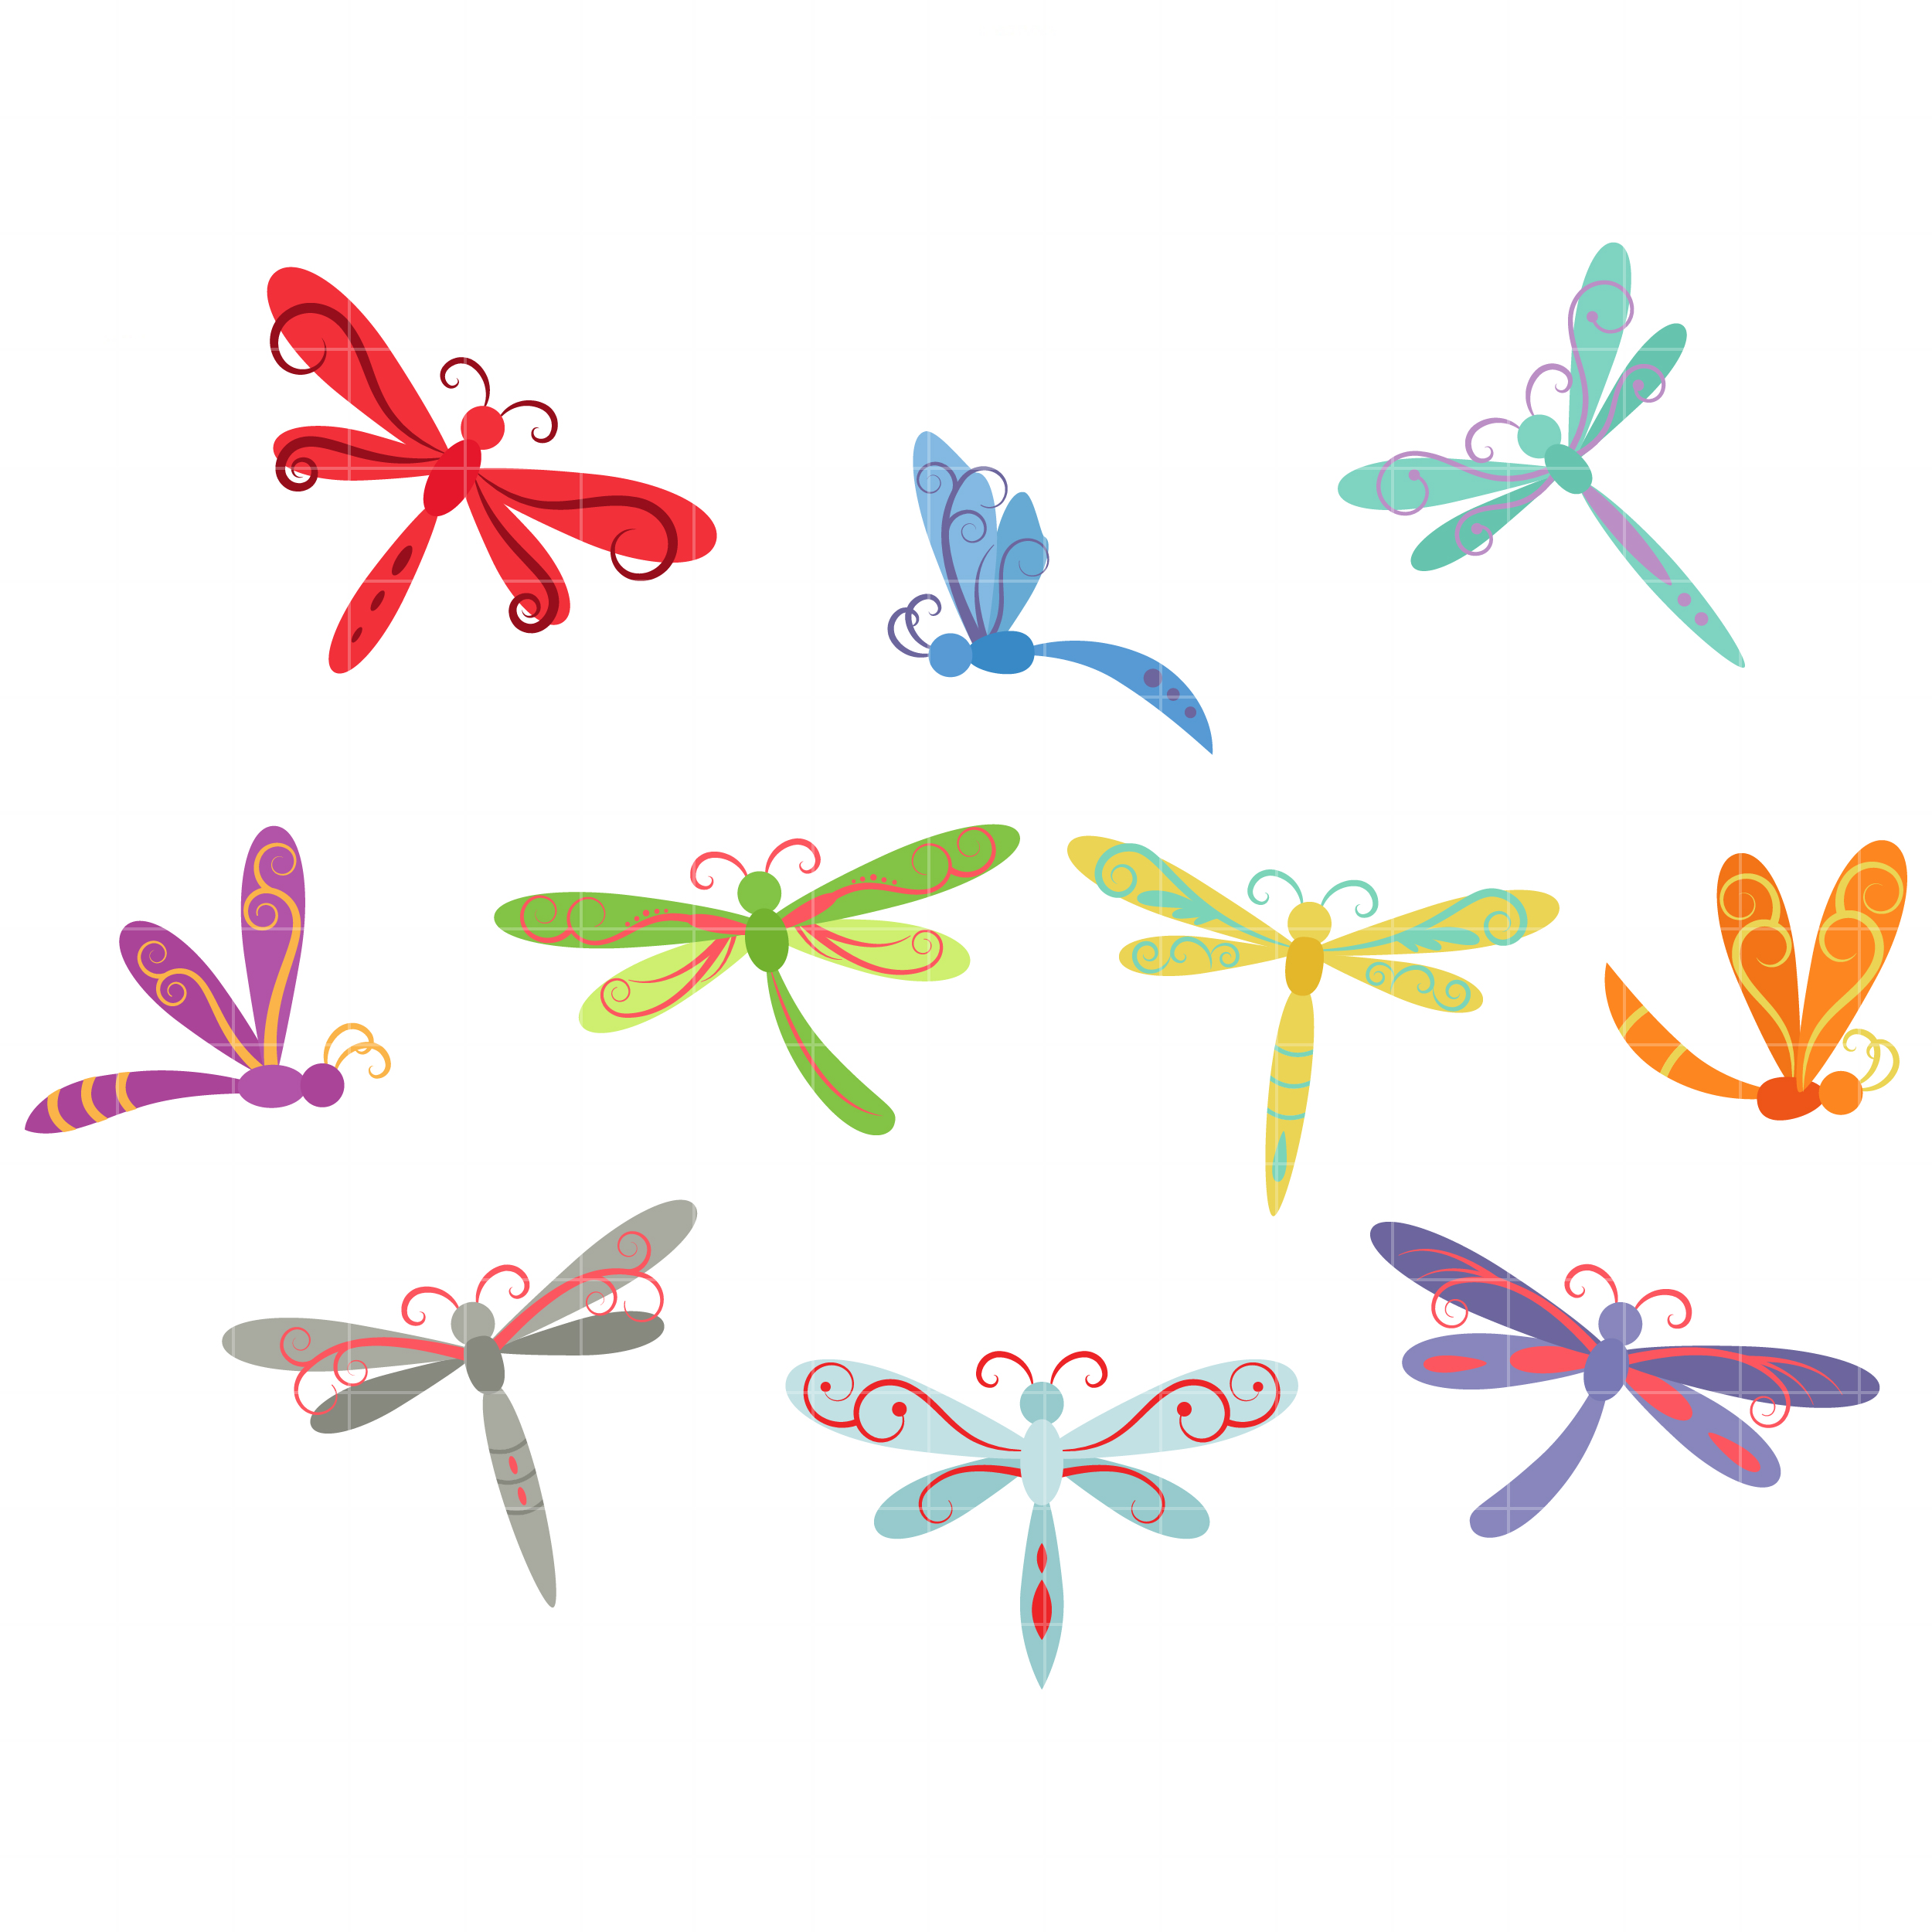 dragonfly clipart free download - photo #33